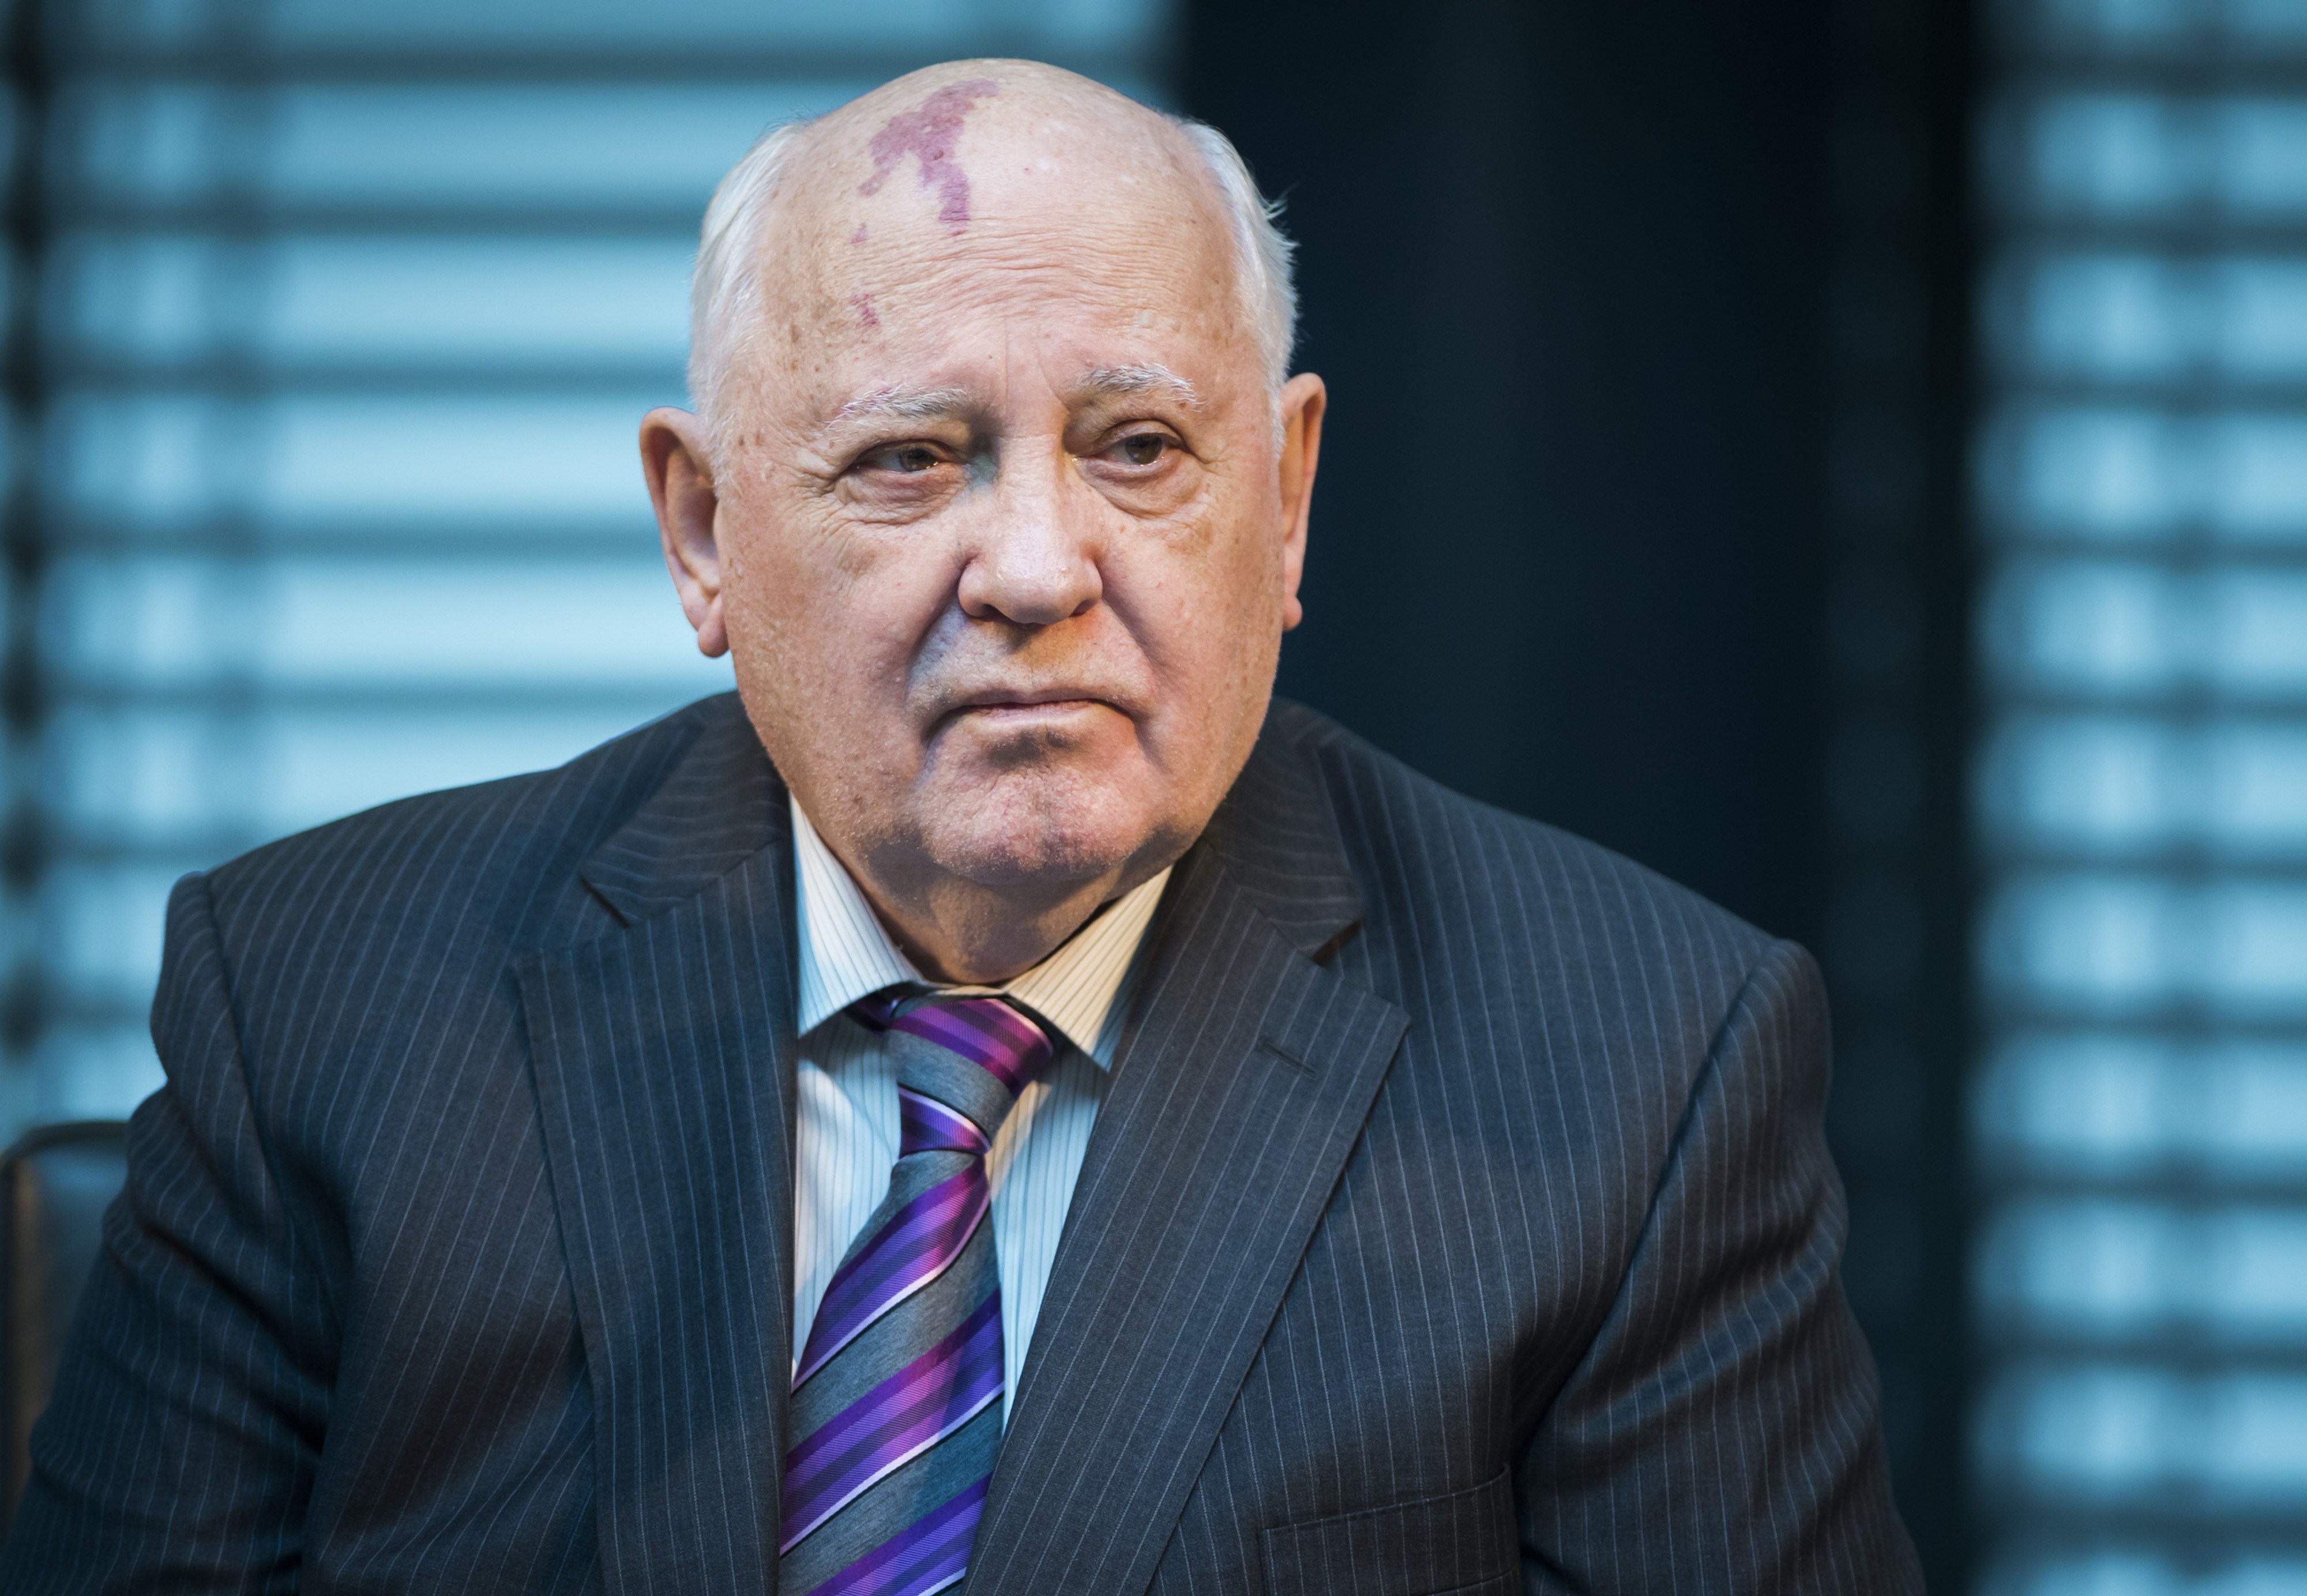 Former President of the Soviet Union Mikhail Gorbachev attends a symposium on security in Europe 25 years after the fall of the "Wall" in Berlin on Nov. 8, 2014. (Odd Andersen—AFP/Getty Images)